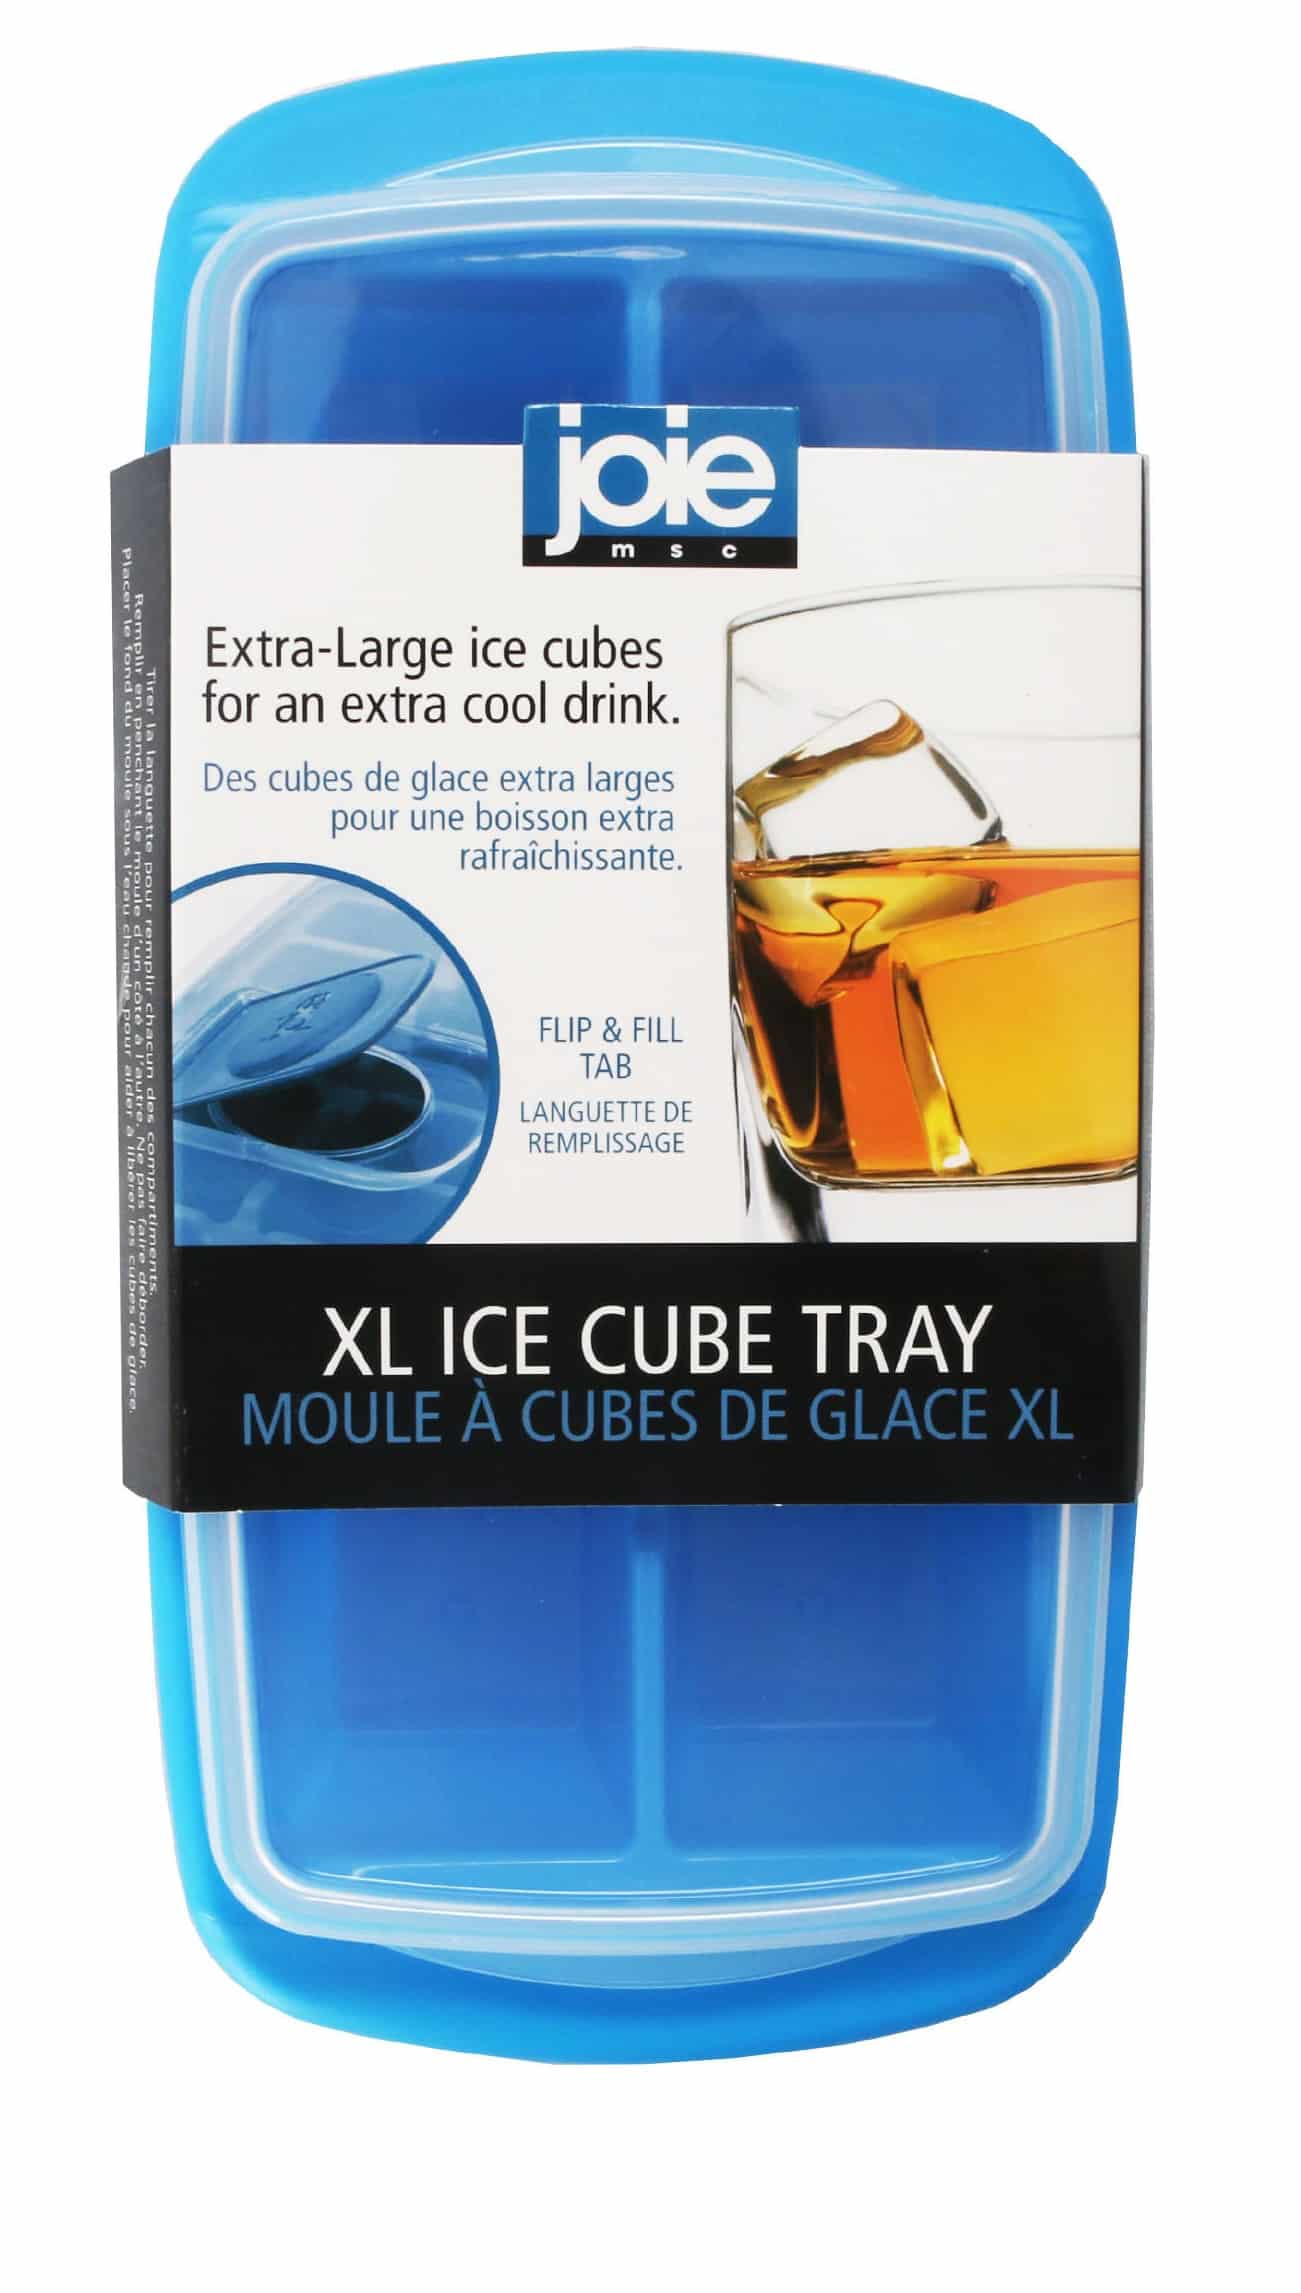 Joie Ice Cube Tray Large Blue